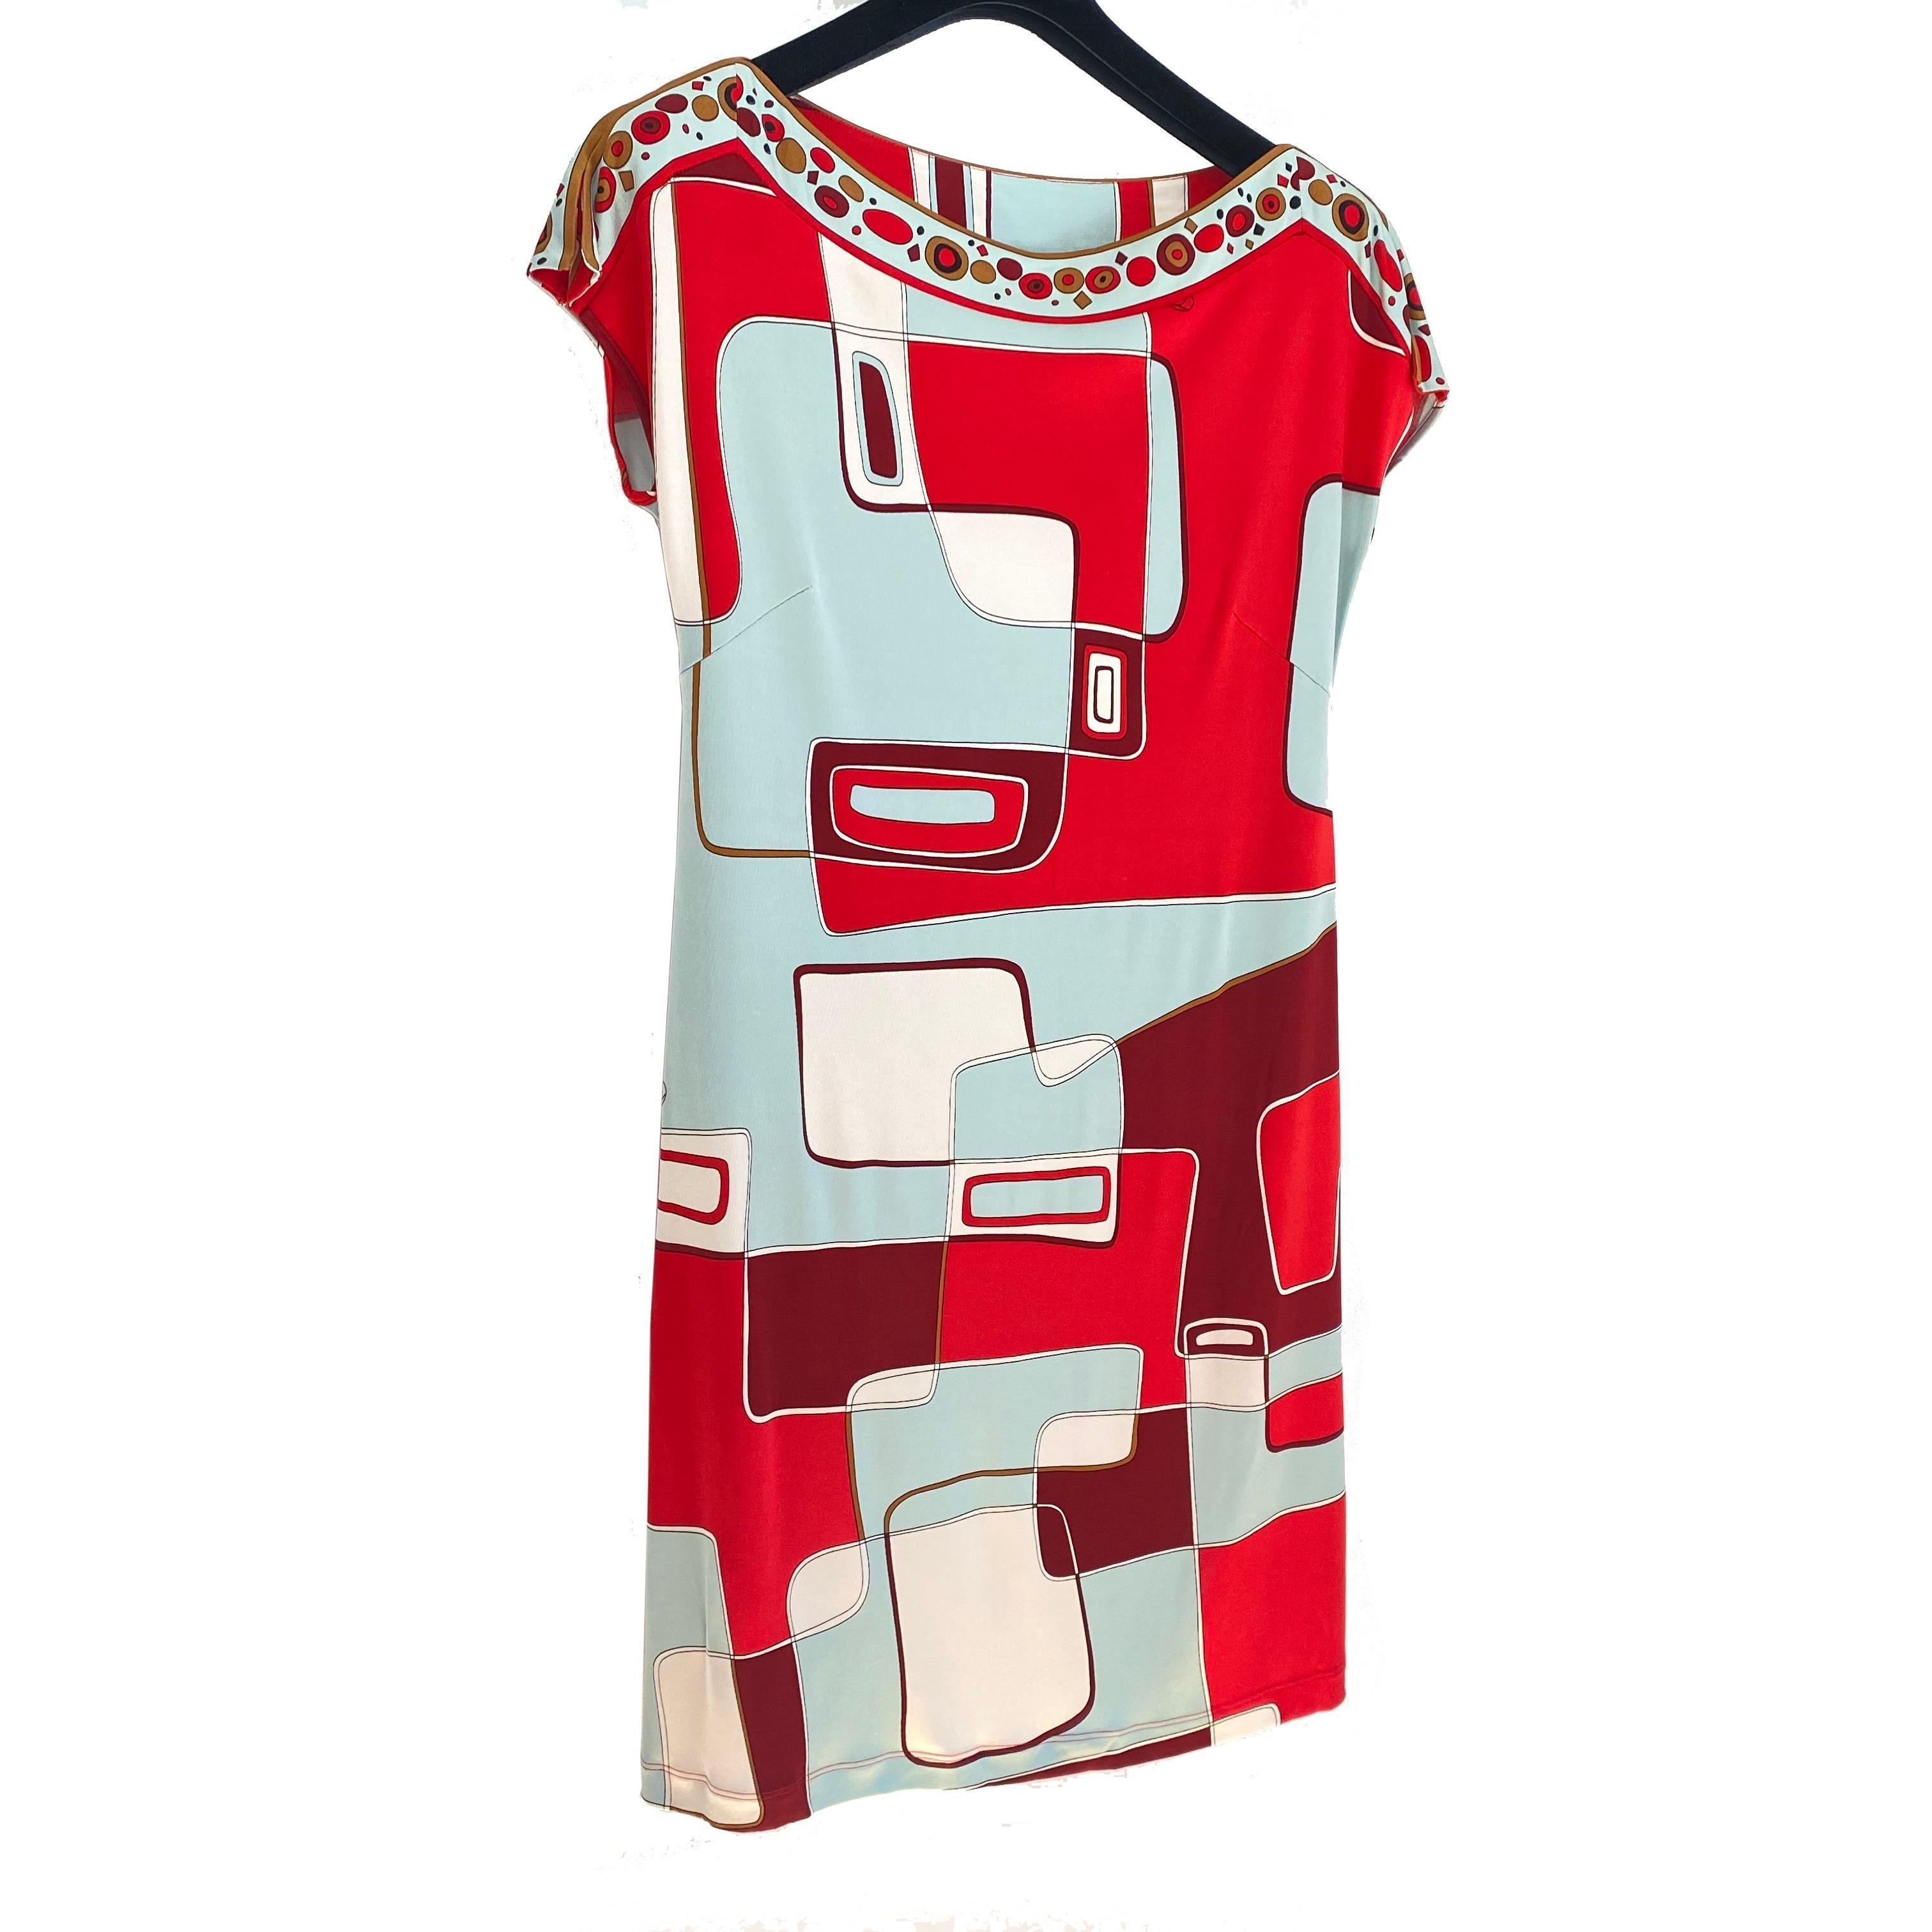 Easy and flattering tunic shift dress with belt in original red and aqua mint signed print.
Approximately 36.5